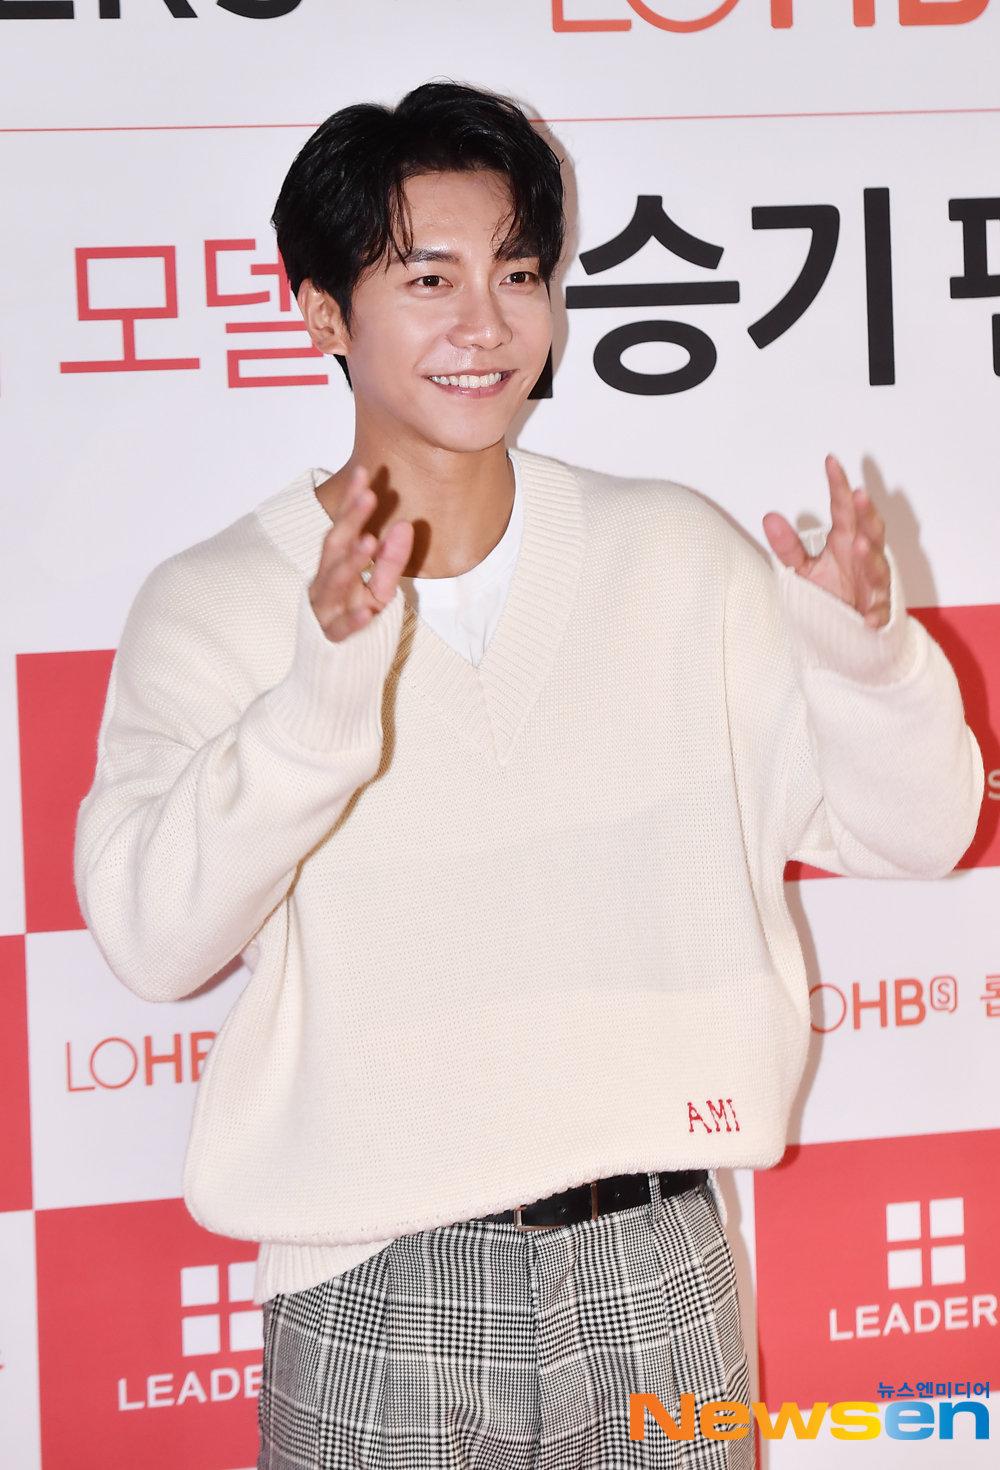 Actor Lee Seung-gi attended a mother cosmetics brand fan signing ceremony held in Itaewon, Seoul City Yongsan District, on the afternoon of September 26.expressiveness